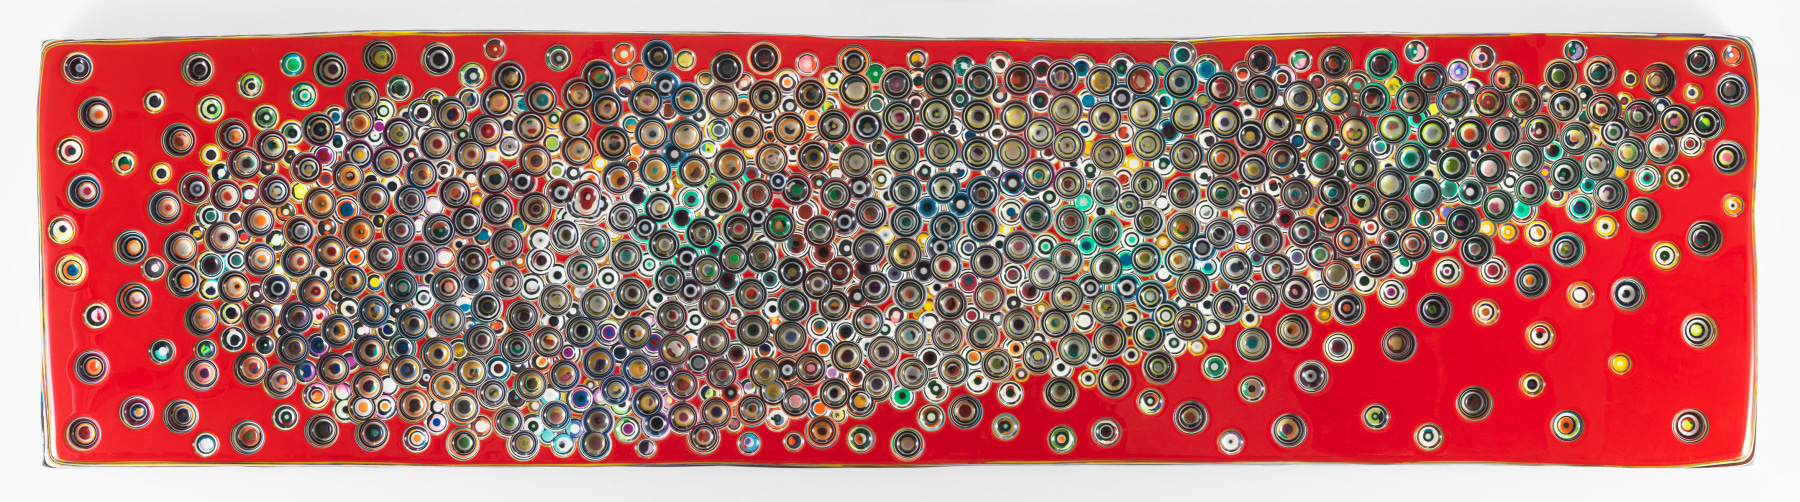 TOUCHINGFROMADISTANCEFURTHERALLTHETIME, 2016, Epoxy resin and pigments on wood, 24 x 96 inches, 61 x 243.8 cm, AMY#28086